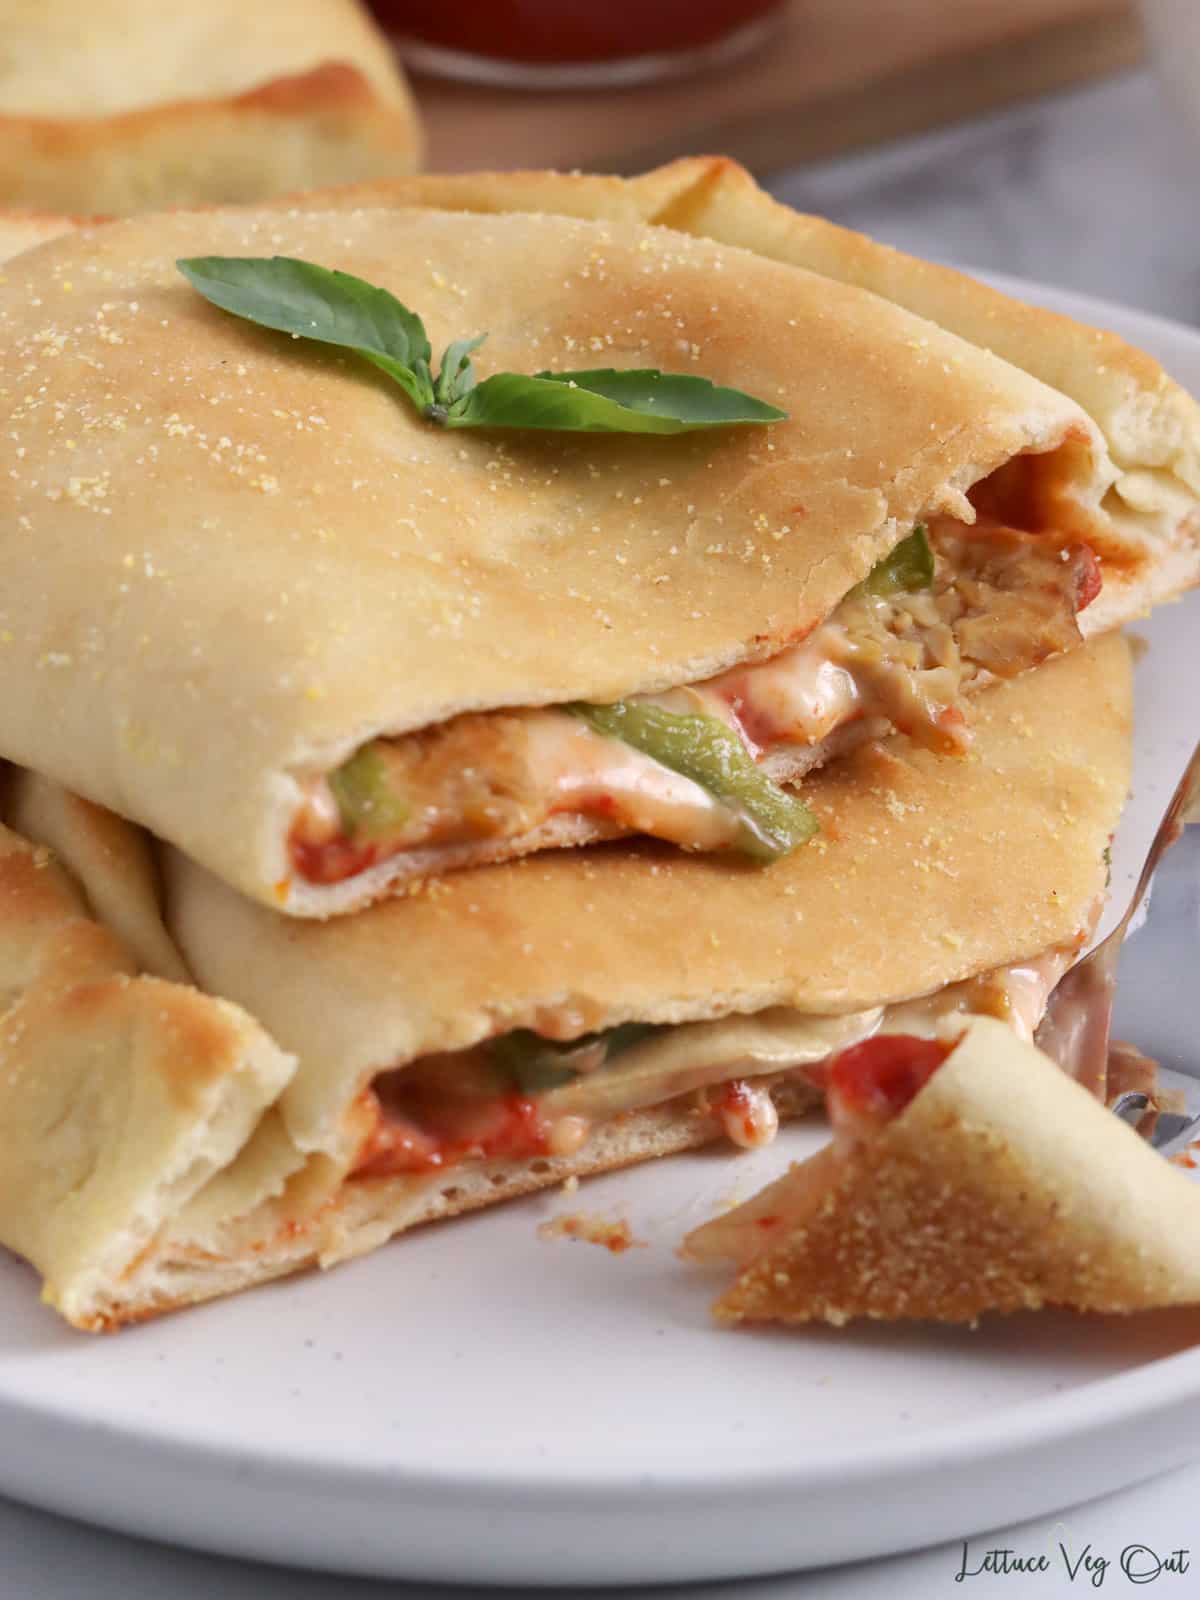 Stack of two calzones halves on a plate with melted cheese, green pepper and tempeh filling visible.